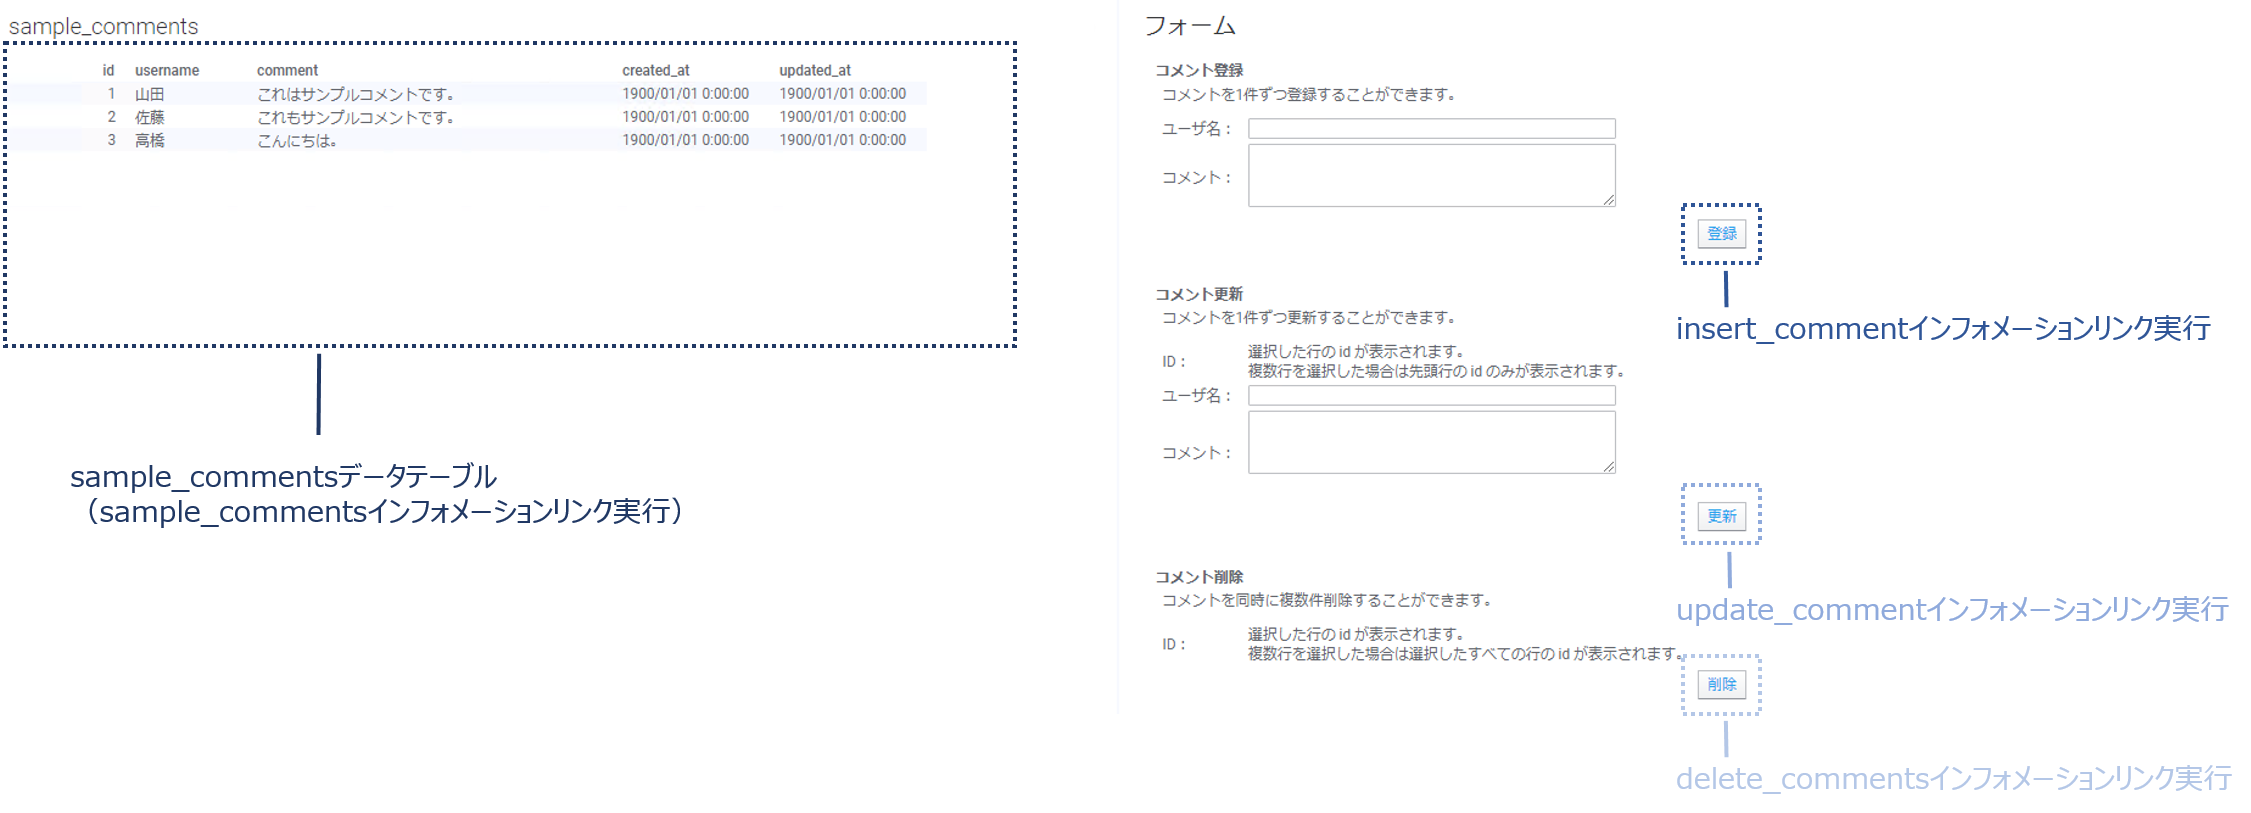 form_demo_overview2.png